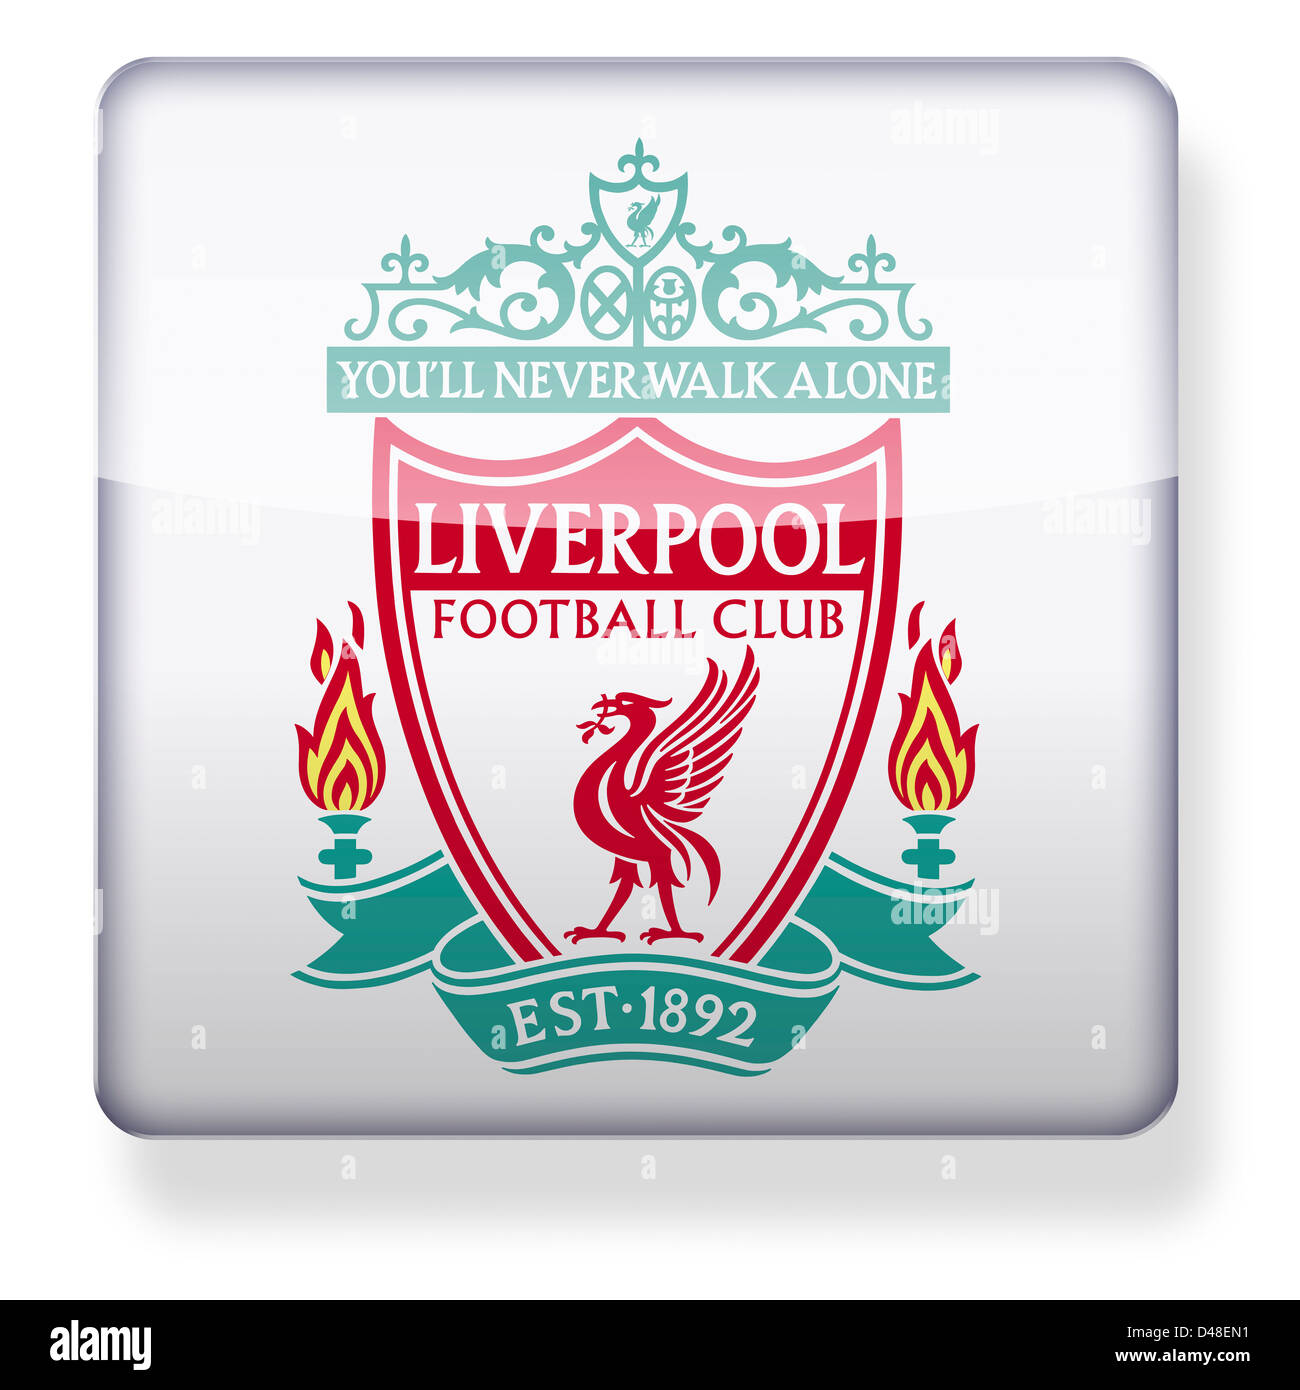 Liverpool football club logo as an app icon. Clipping path included. Stock Photo